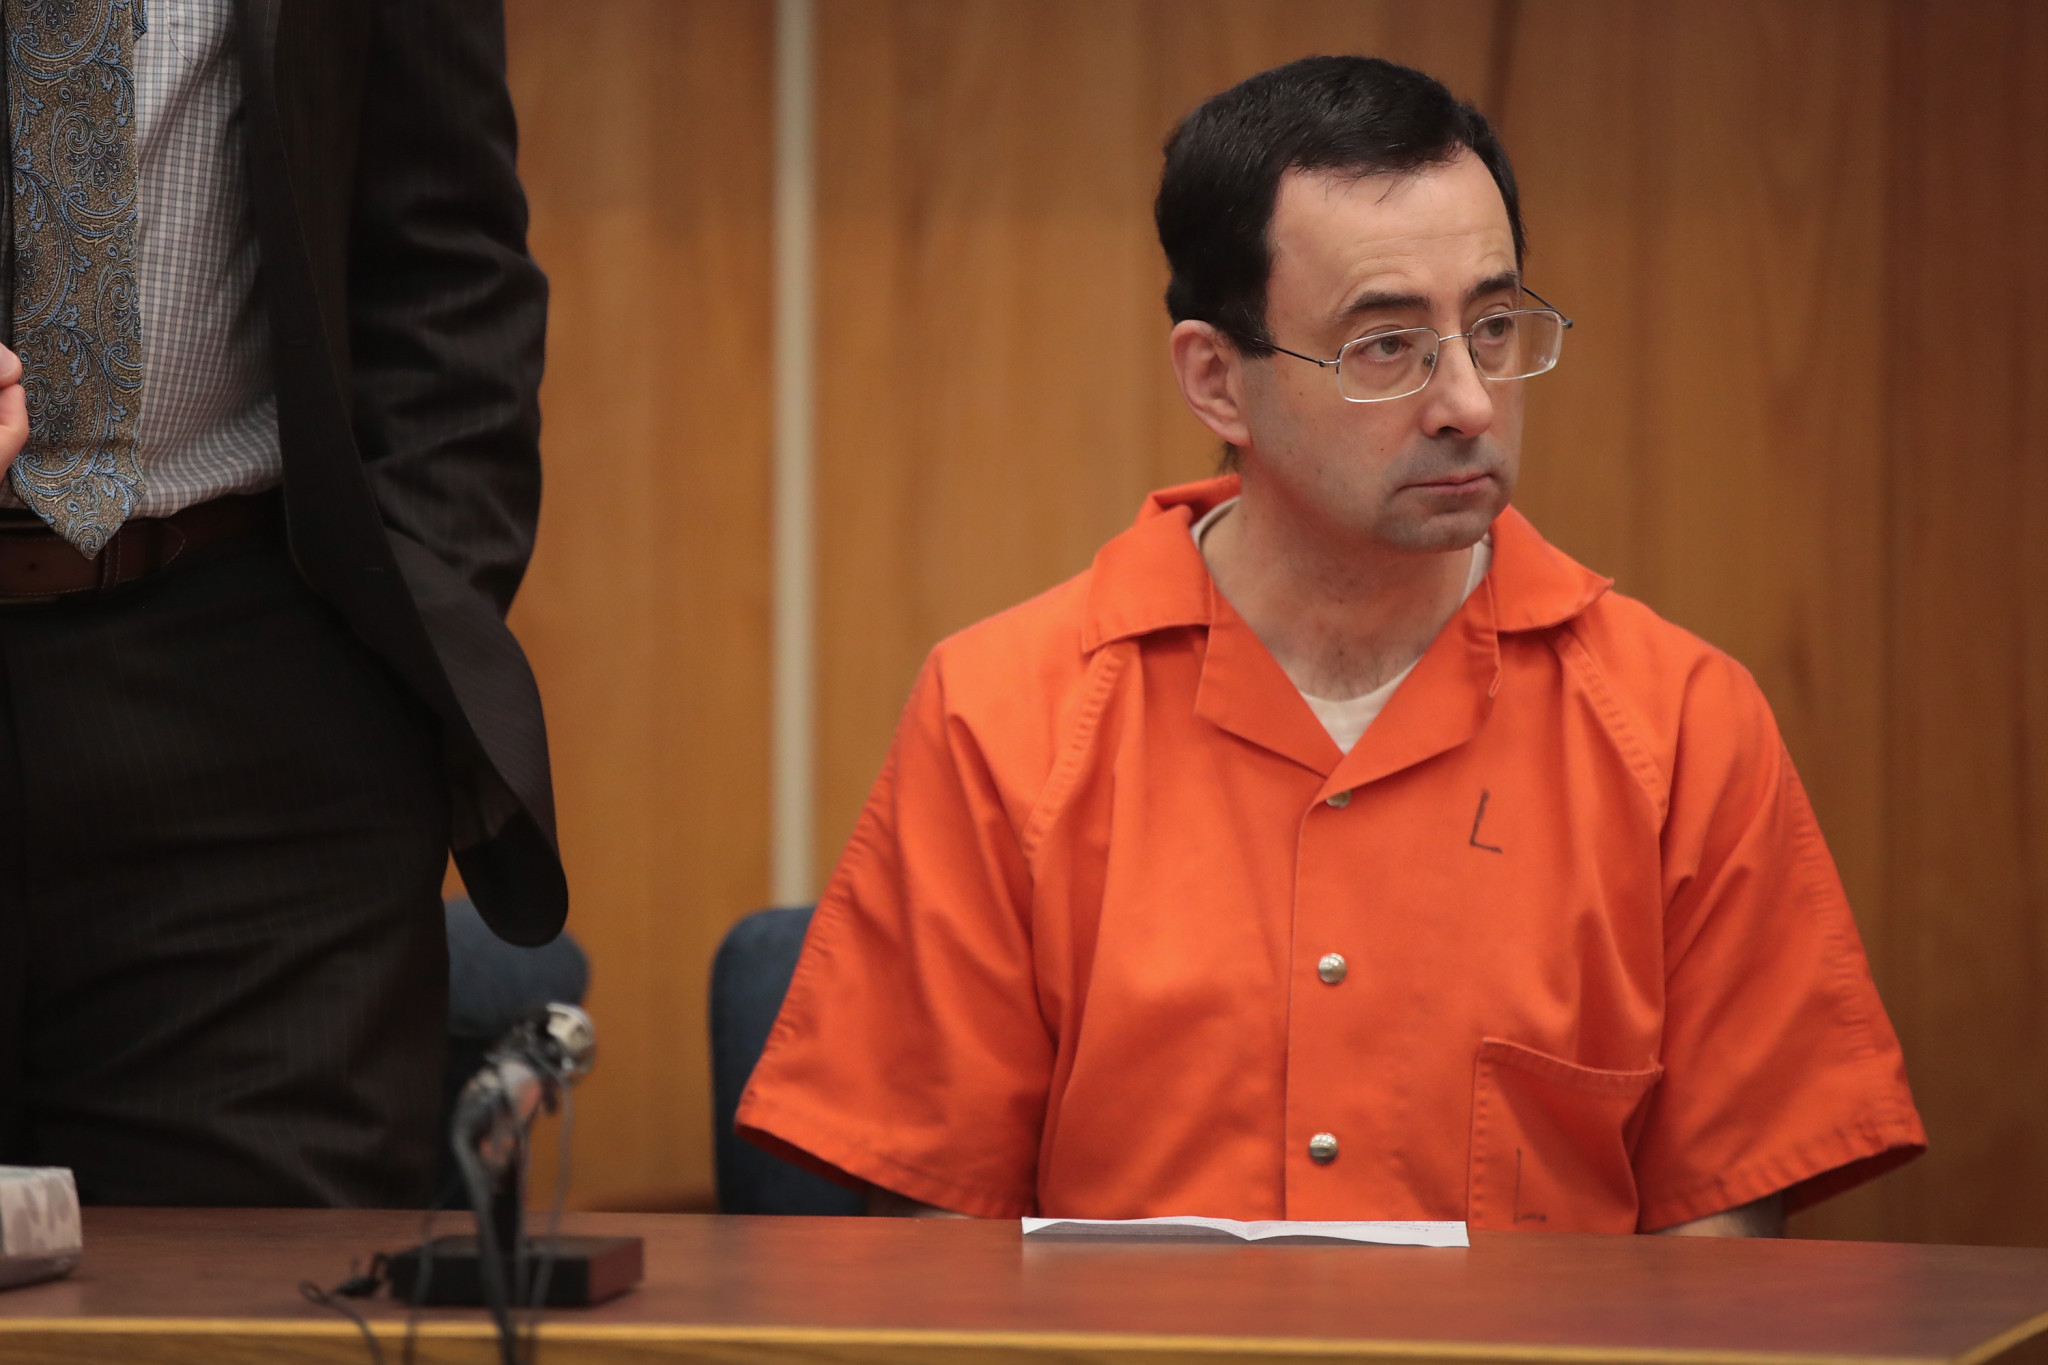 Father who attempted to attack Nassar donates funds to four charities 